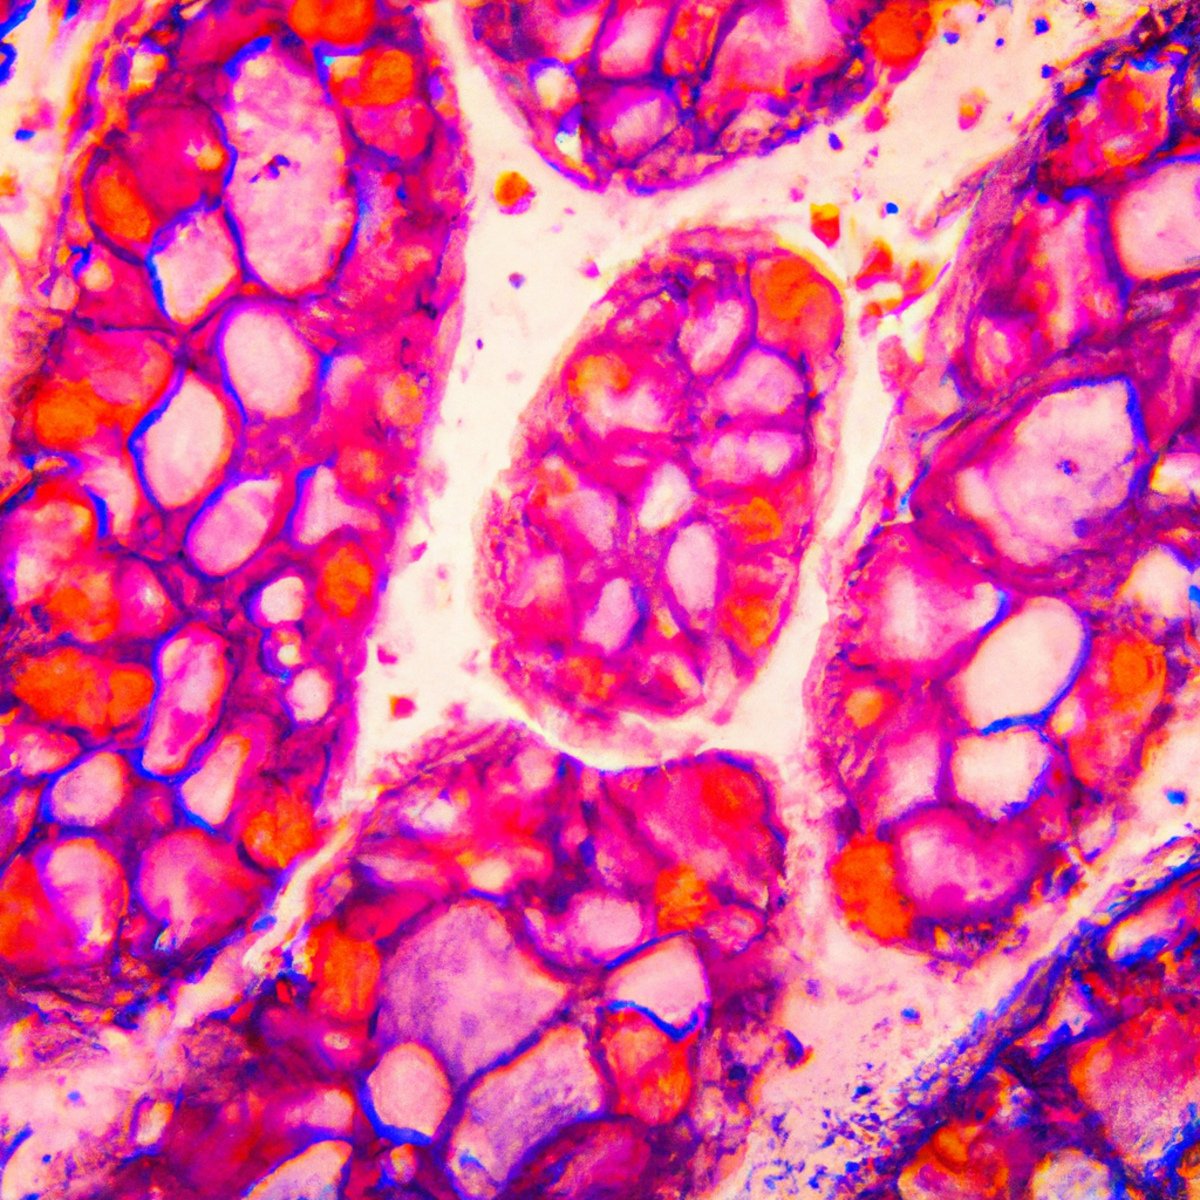 Close-up of Menetrier's Disease microscope slide reveals enlarged and irregular gastric pits, emphasizing disease severity.